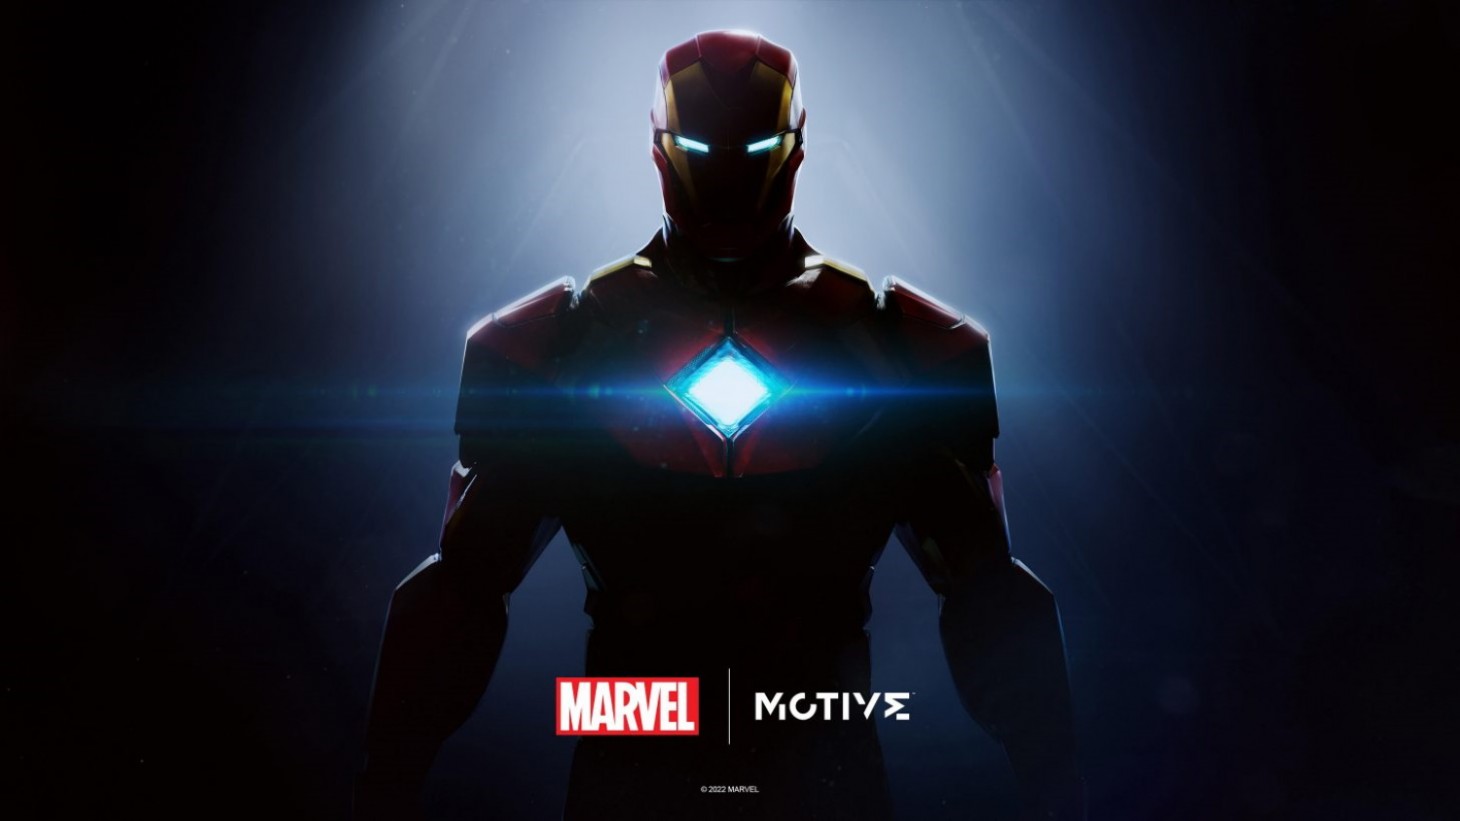 Motive Studio Announces SinglePlayer Iron Man Game As First Part Of